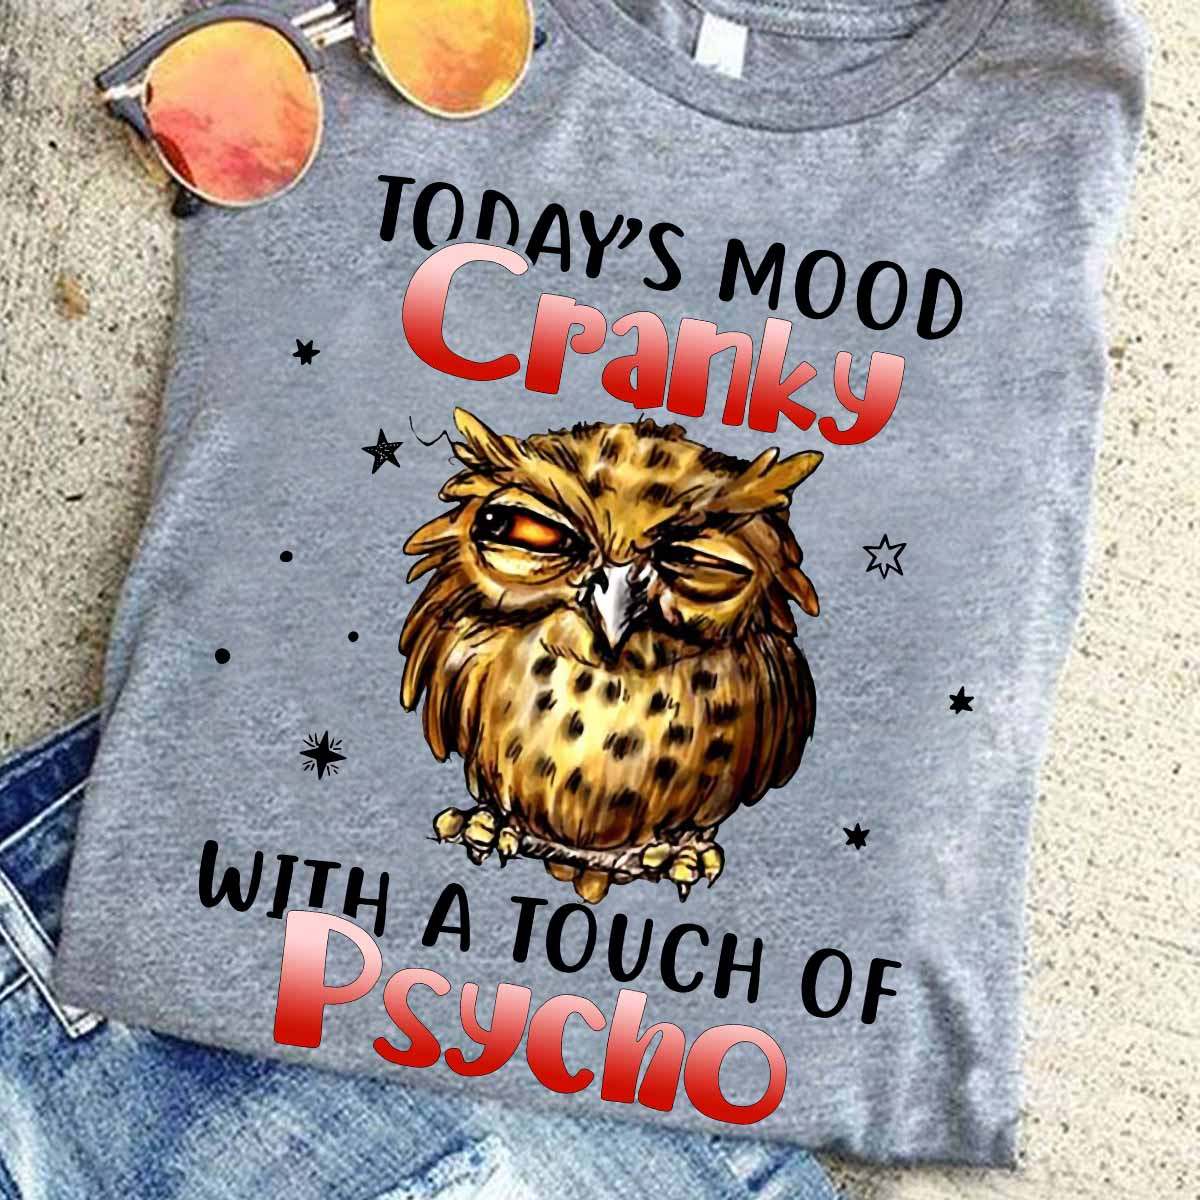 Today's mood cranky with a touch of psycho - Grumpy owl